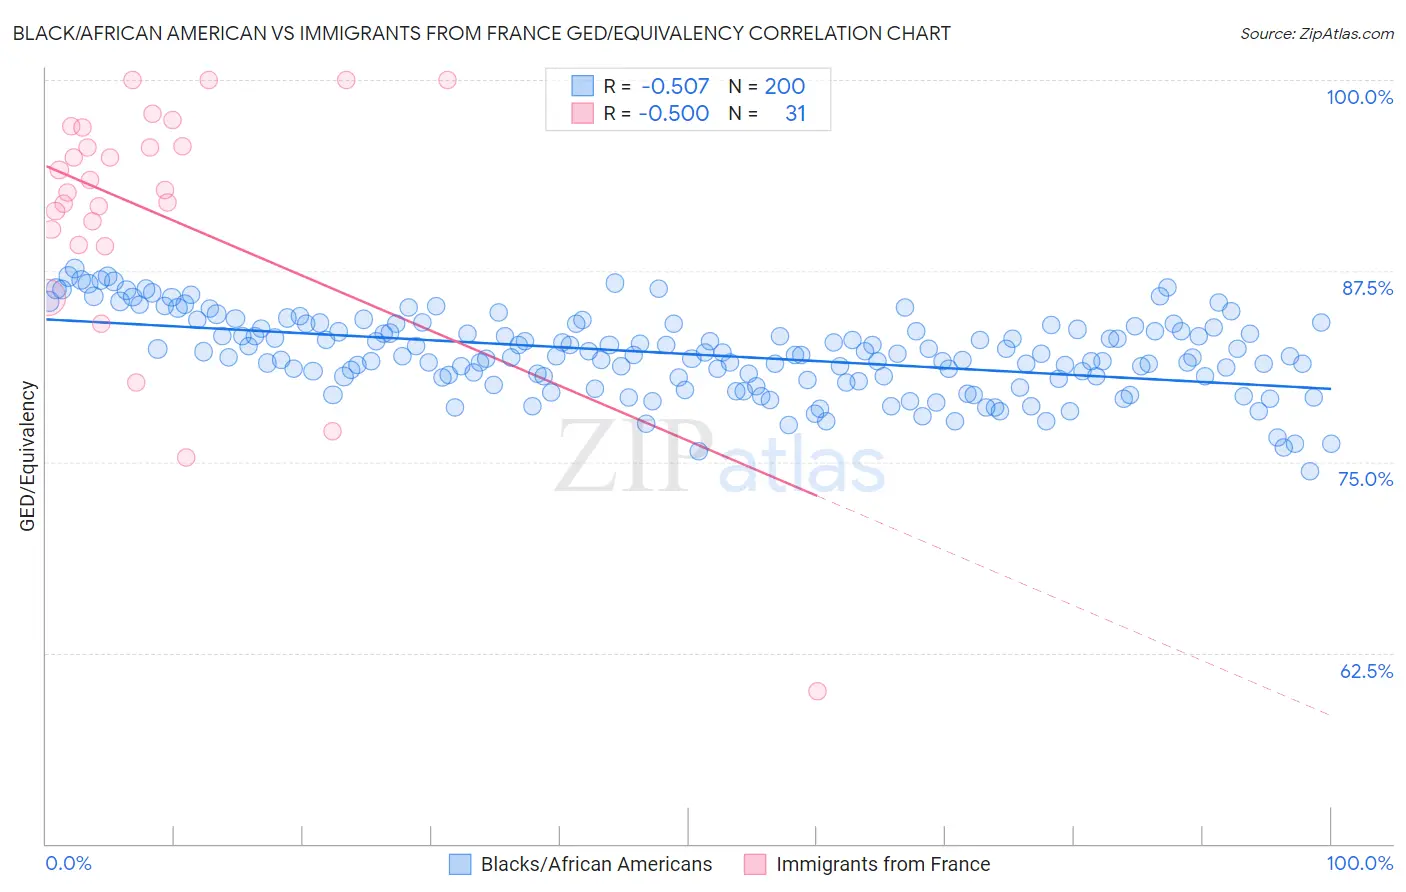 Black/African American vs Immigrants from France GED/Equivalency